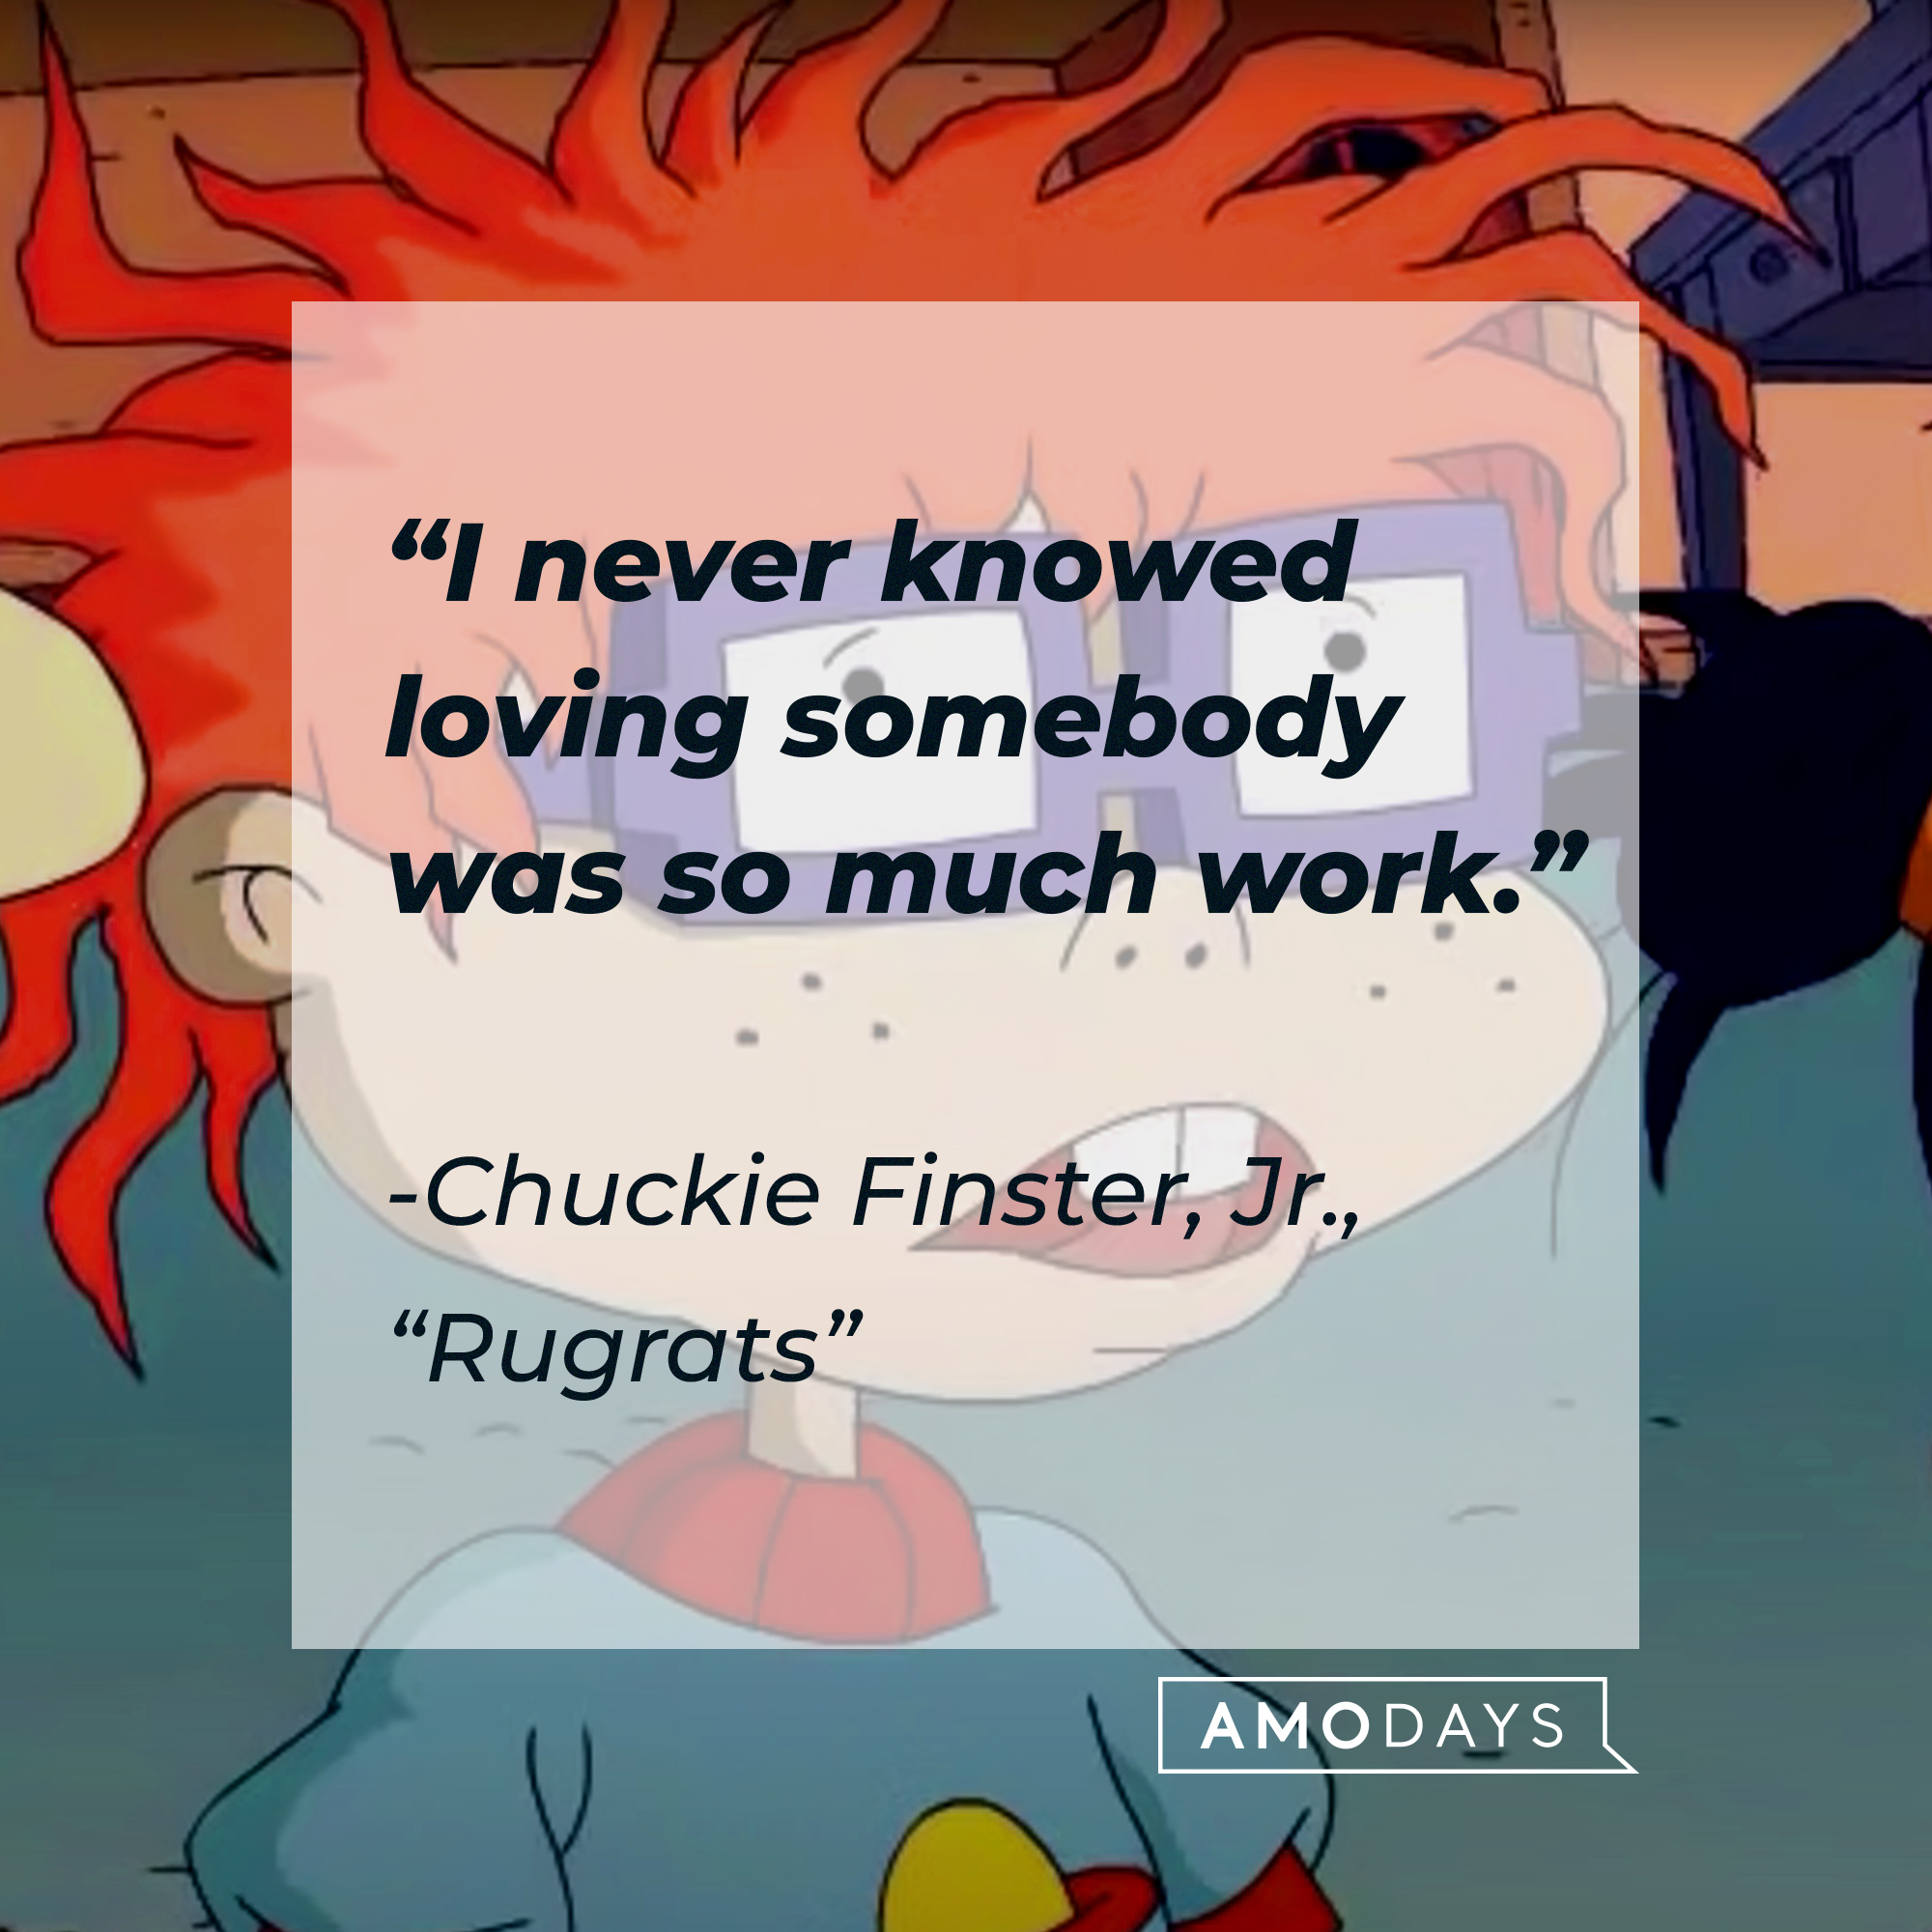 Chuckie Finster Jr. with his quote: "I never knowed loving somebody was so much work.” | Source: Facebook.com/Rugrats